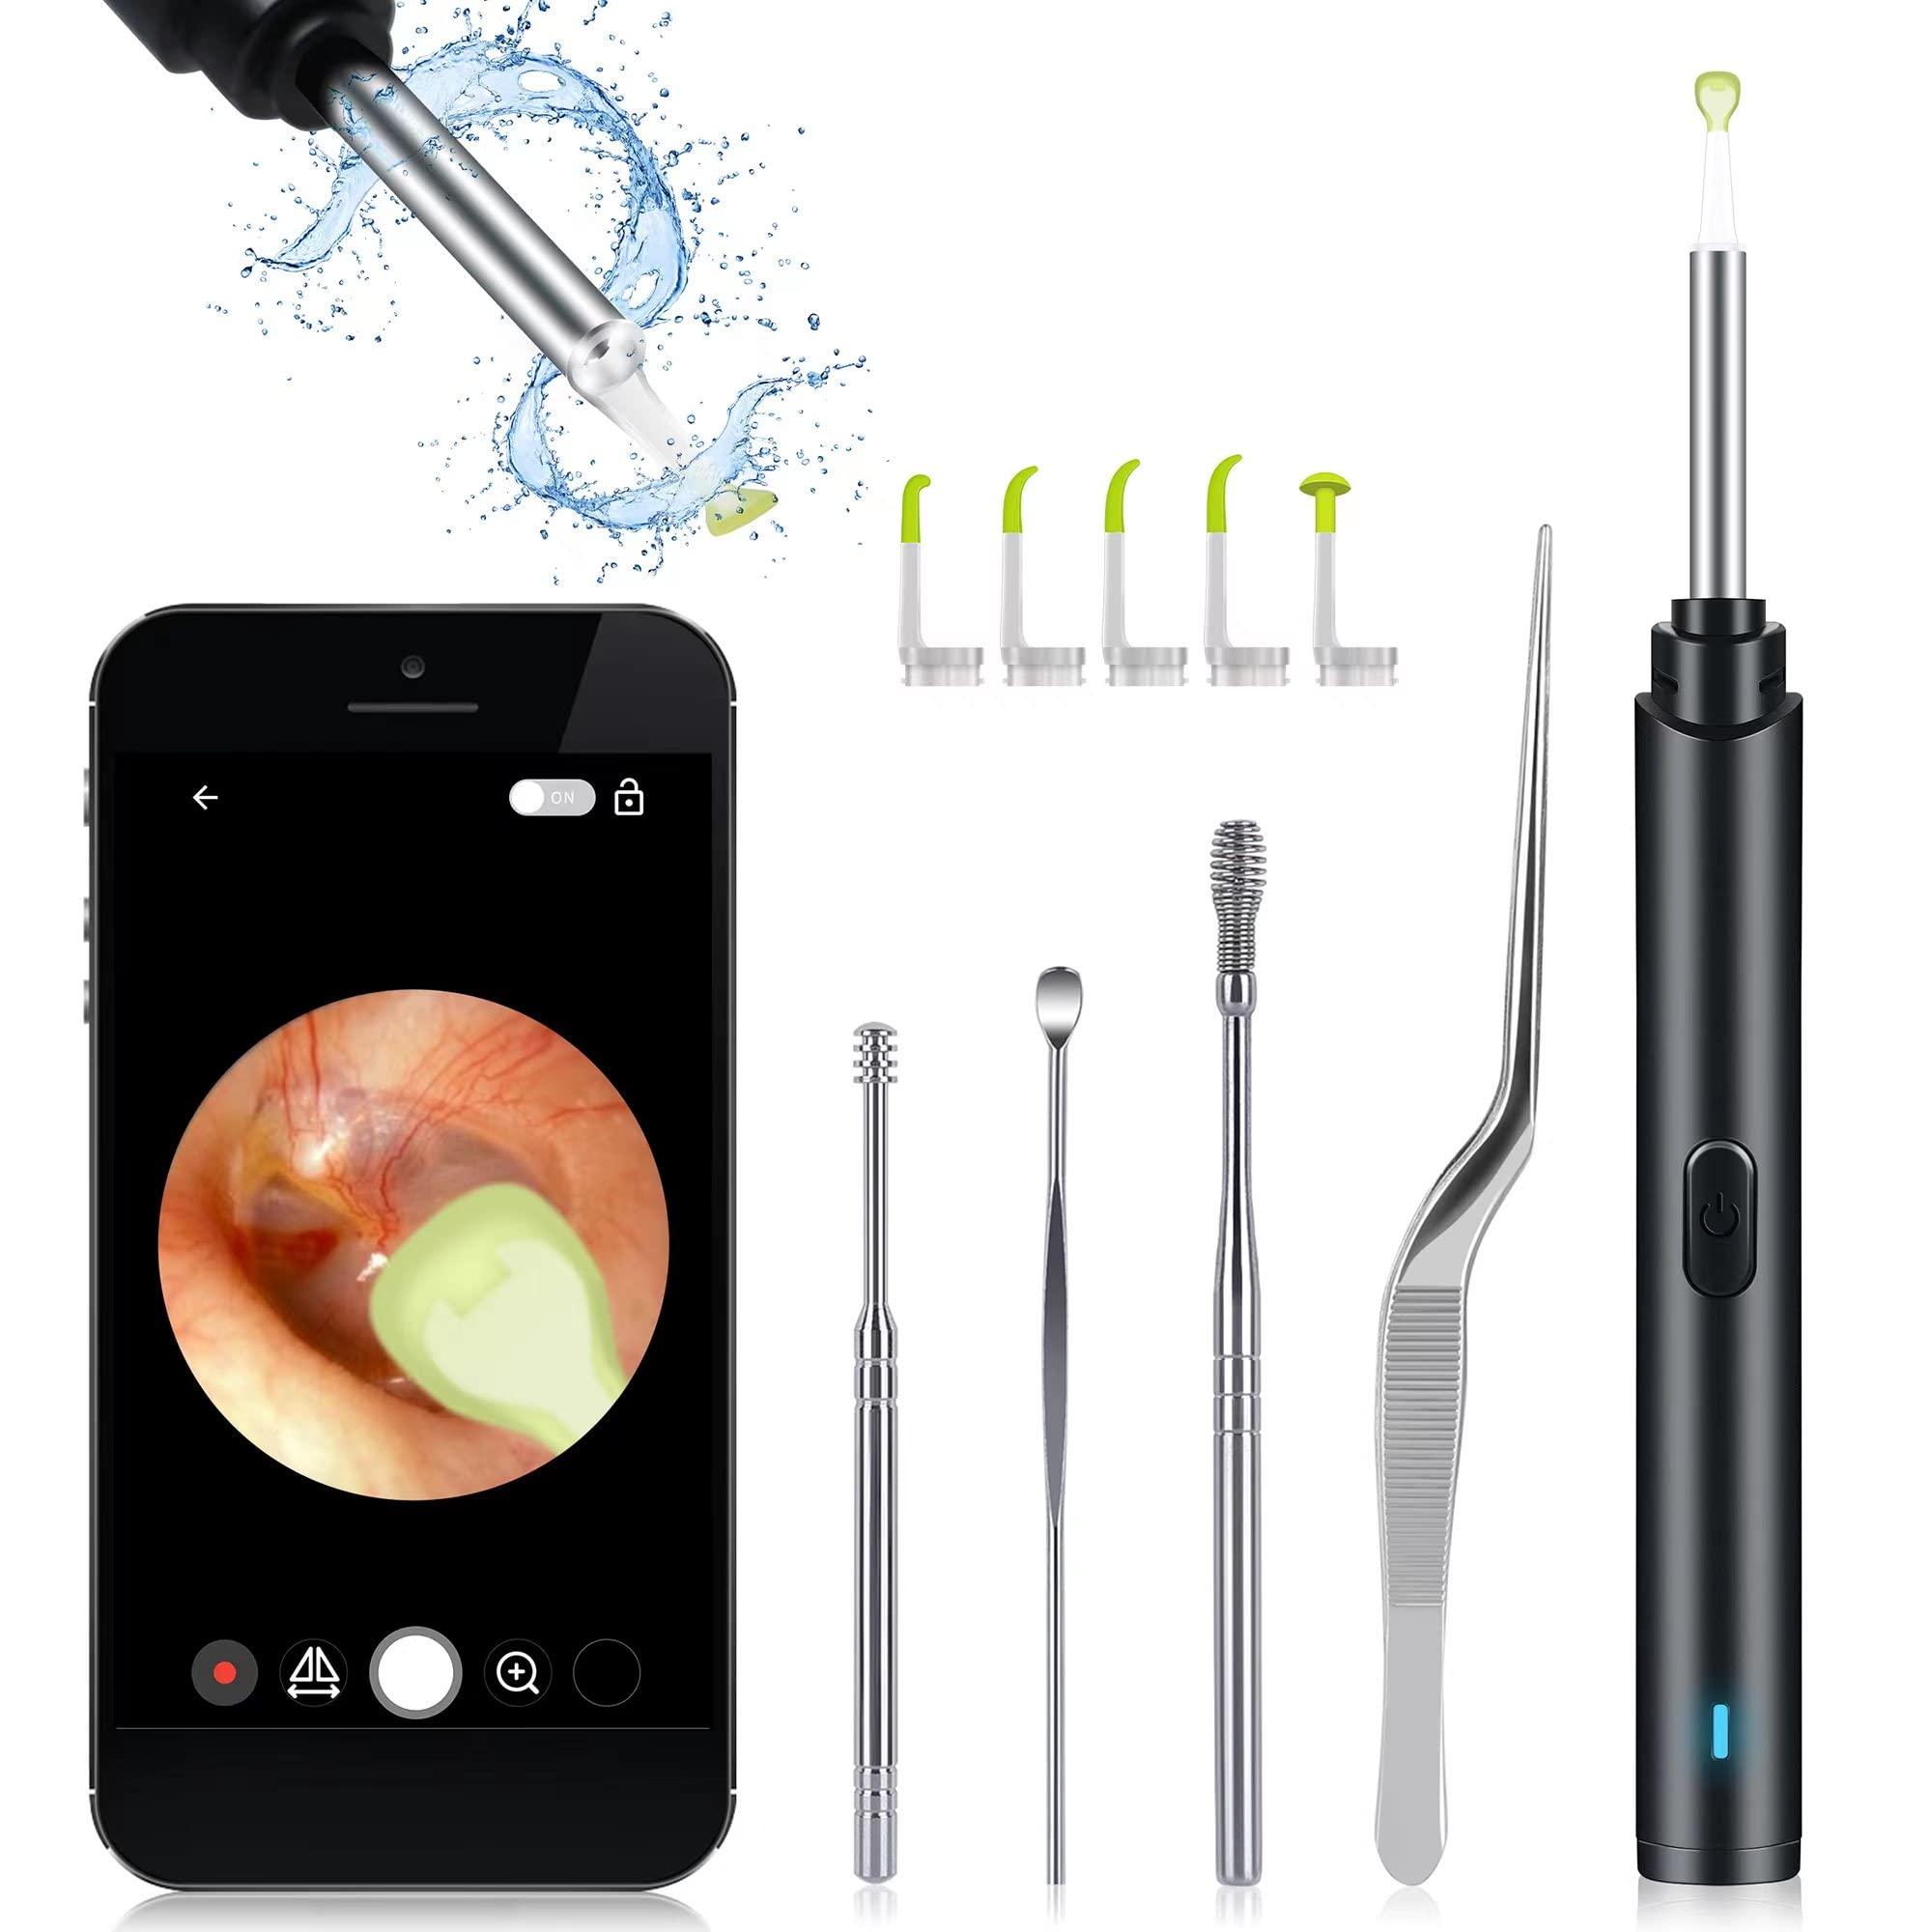 Ear Wax Removal Tool, Wireless WiFi Ear Cleaner with 1296P FHD Camera, Earwax Remover, Ear Scope Otoscope with Light, Ear Cleaning Kit Smart Visual for iPhone, iPad & Android